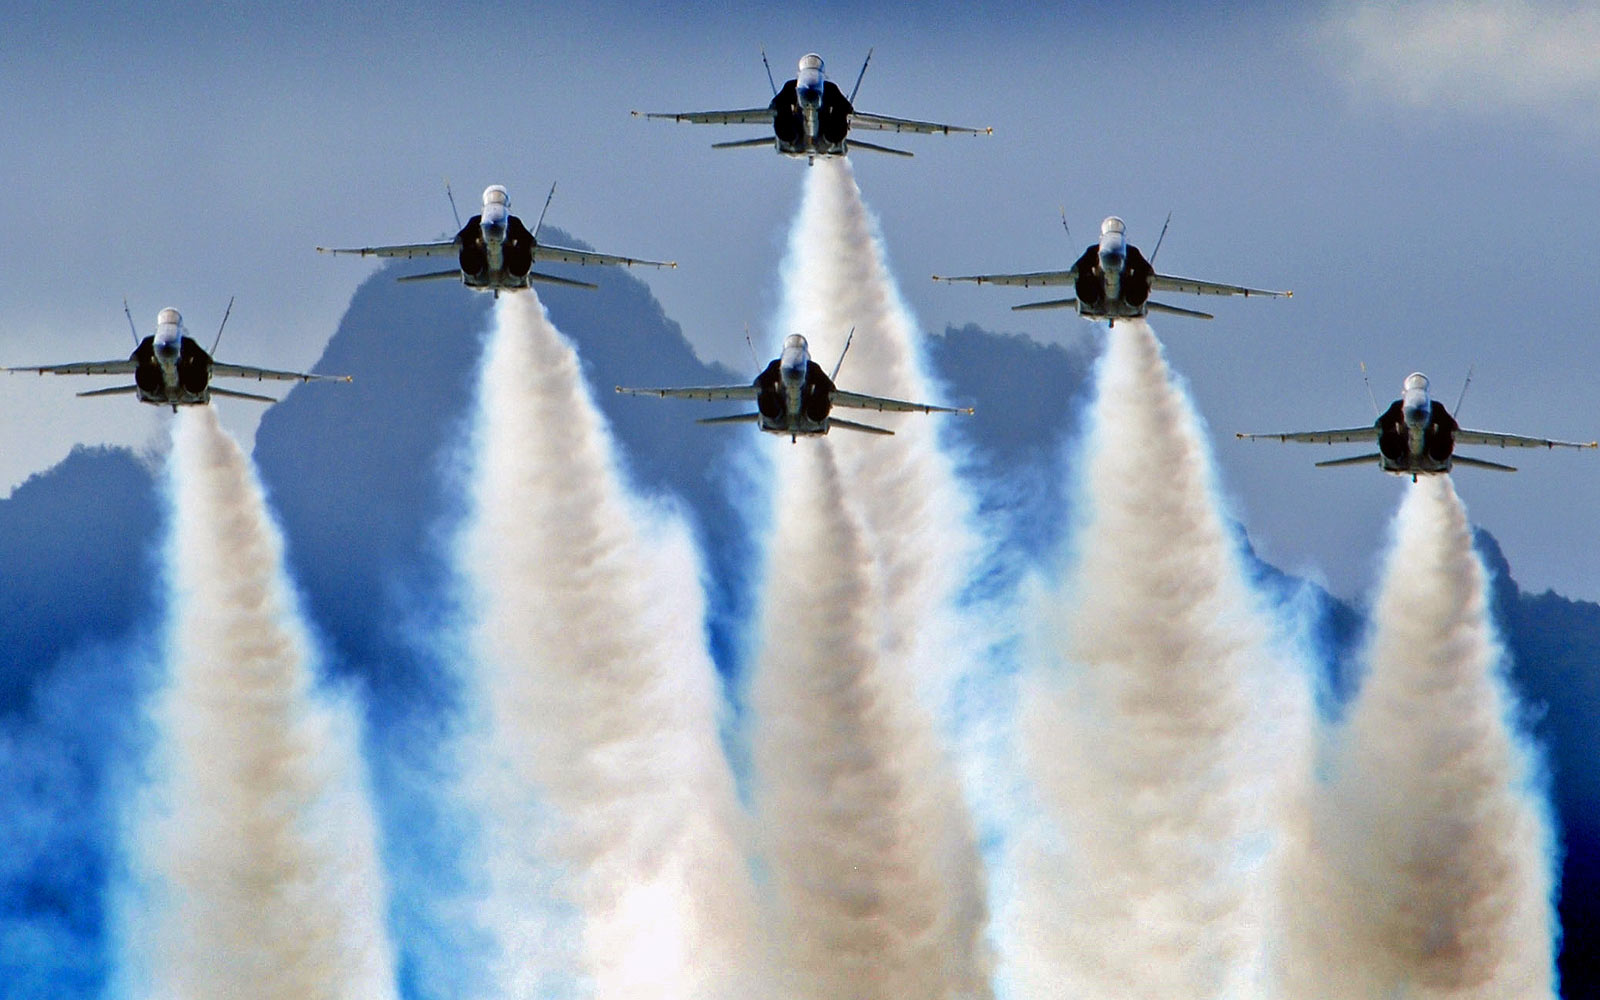 Blue Angels Demostration Wallpaper Cool HD Here